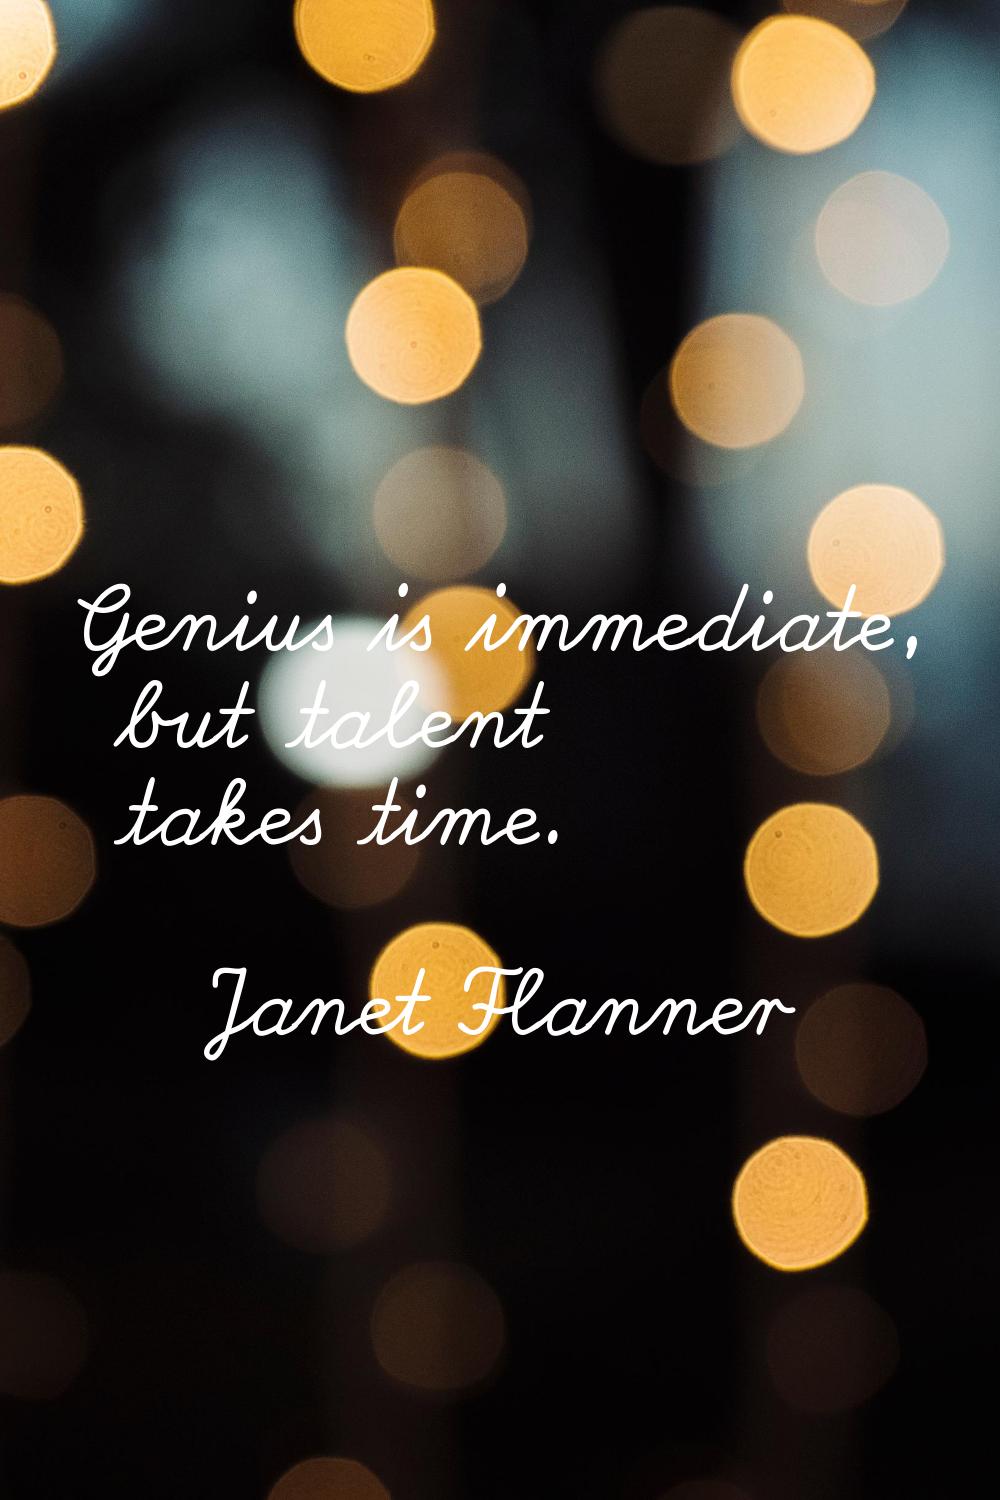 Genius is immediate, but talent takes time.